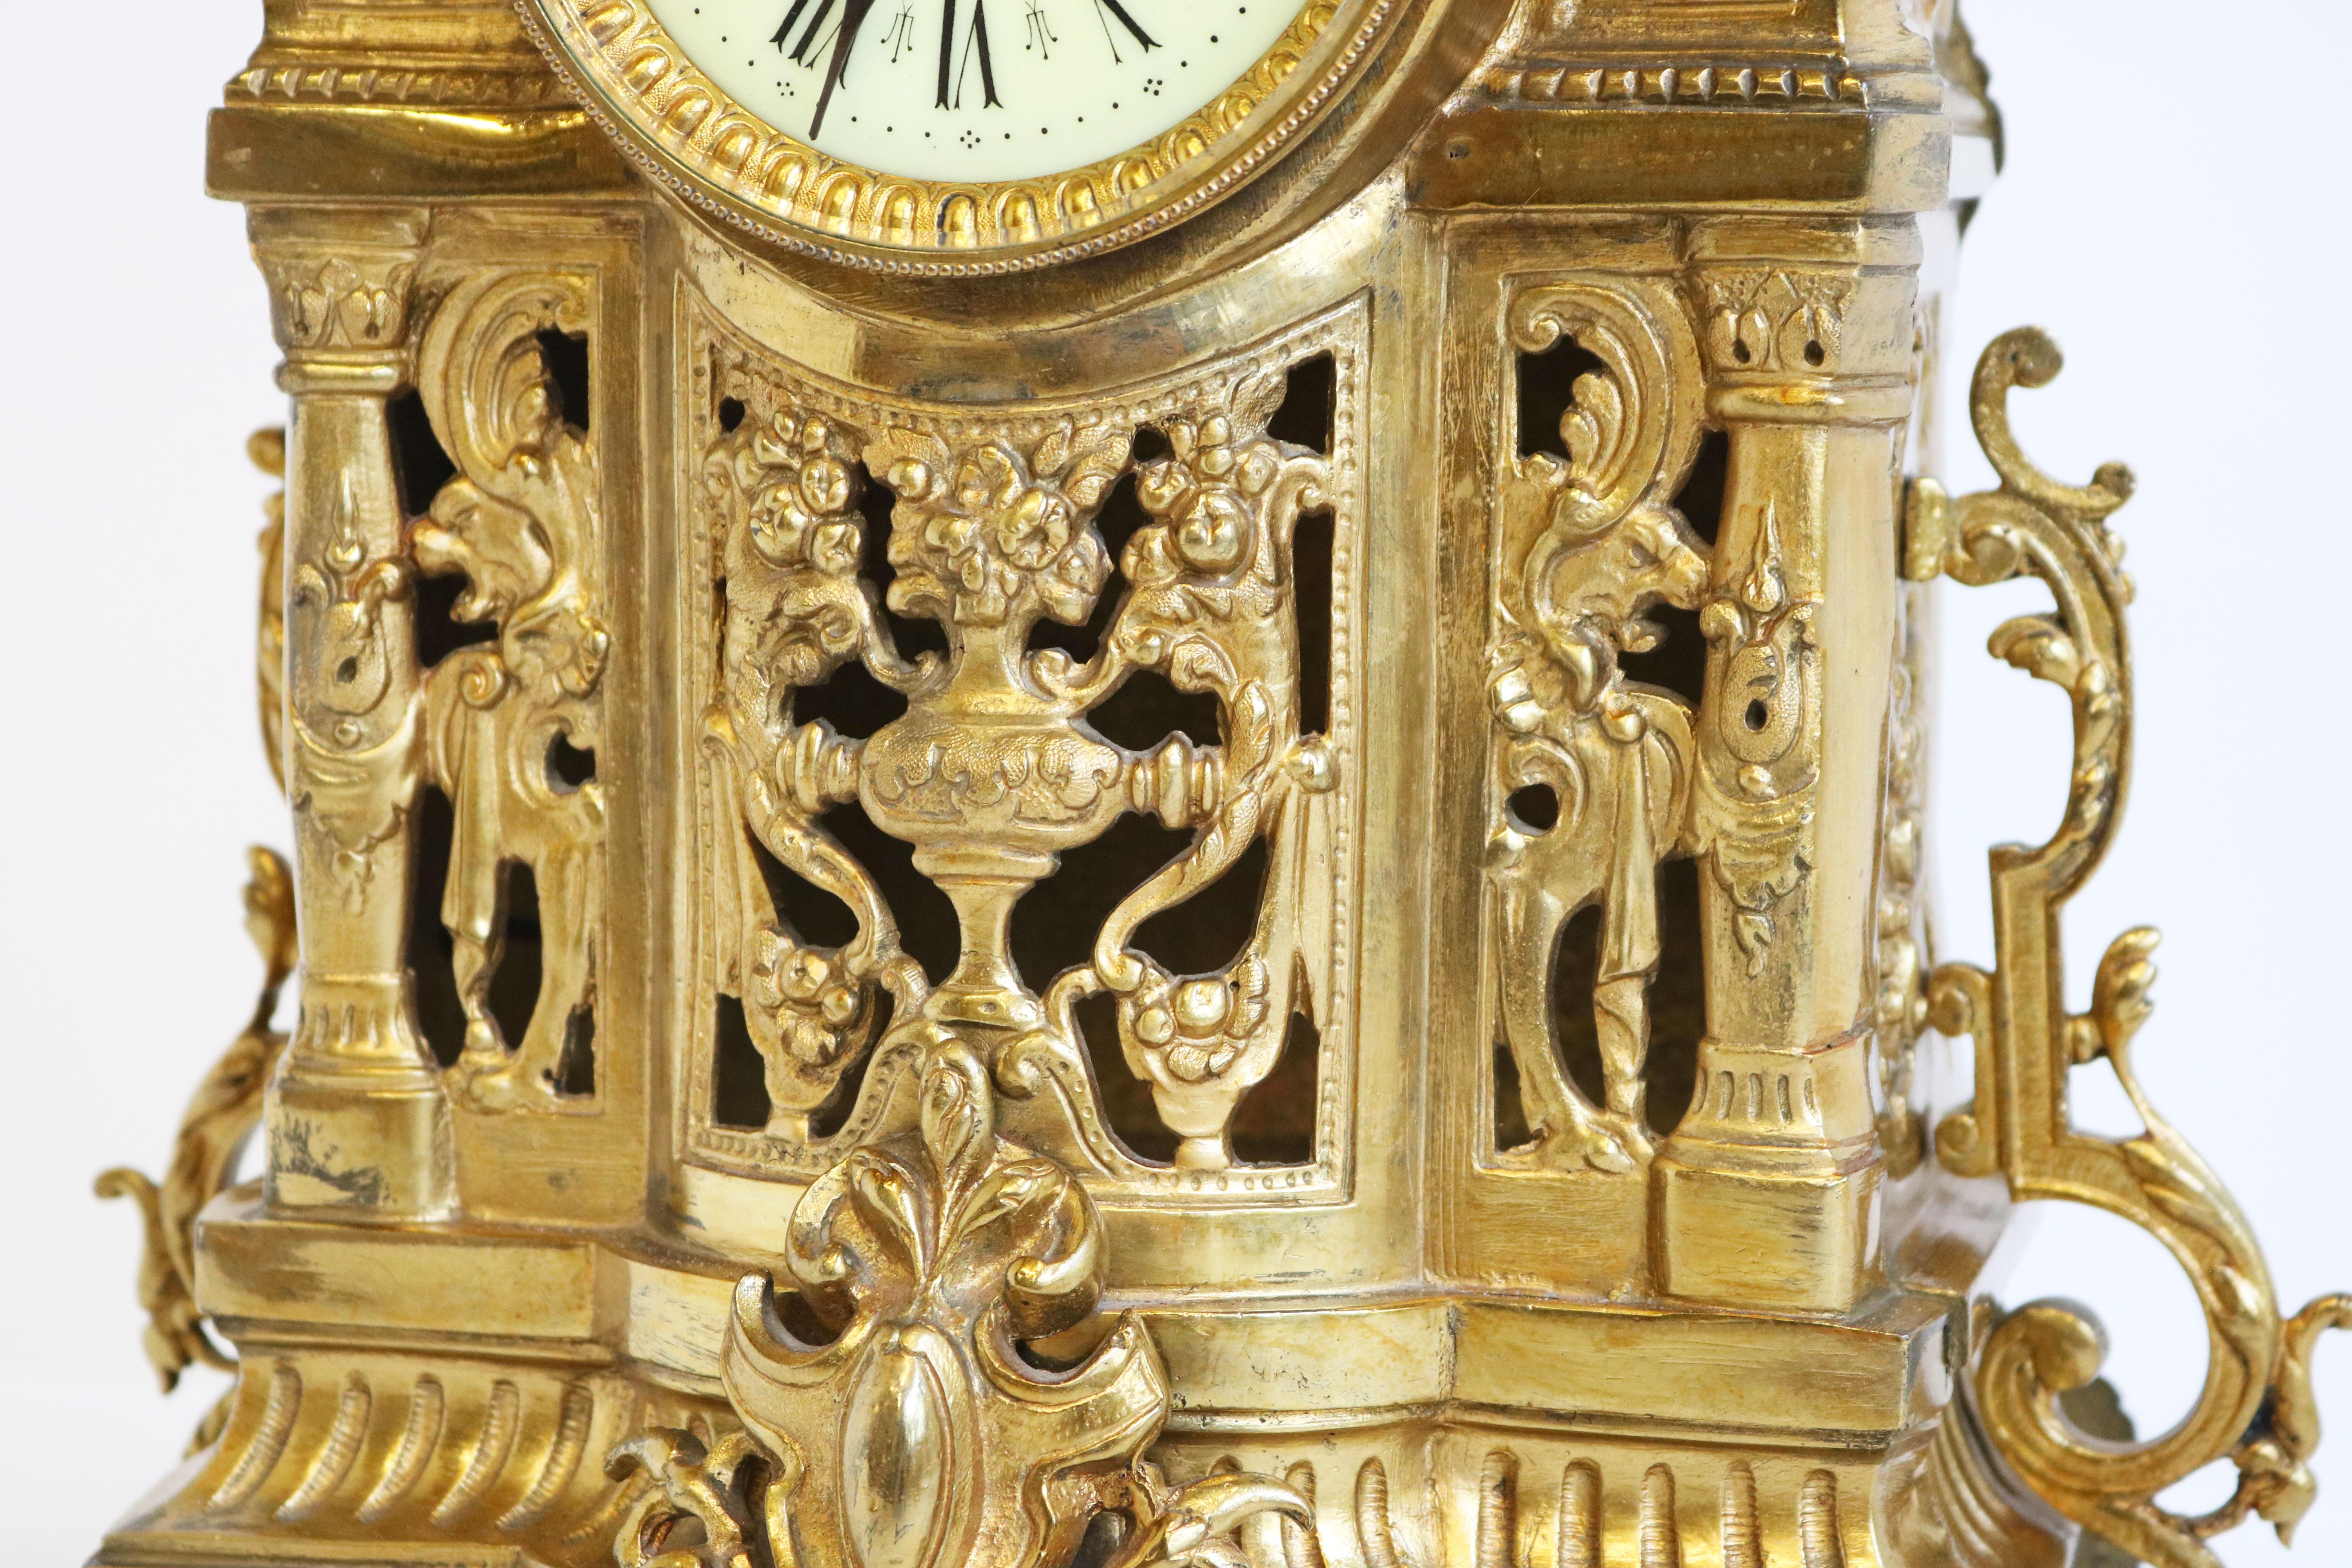 Huge Antique French Gilt Bronze Classical Clock Set 19th century Acanthus leaves For Sale 4